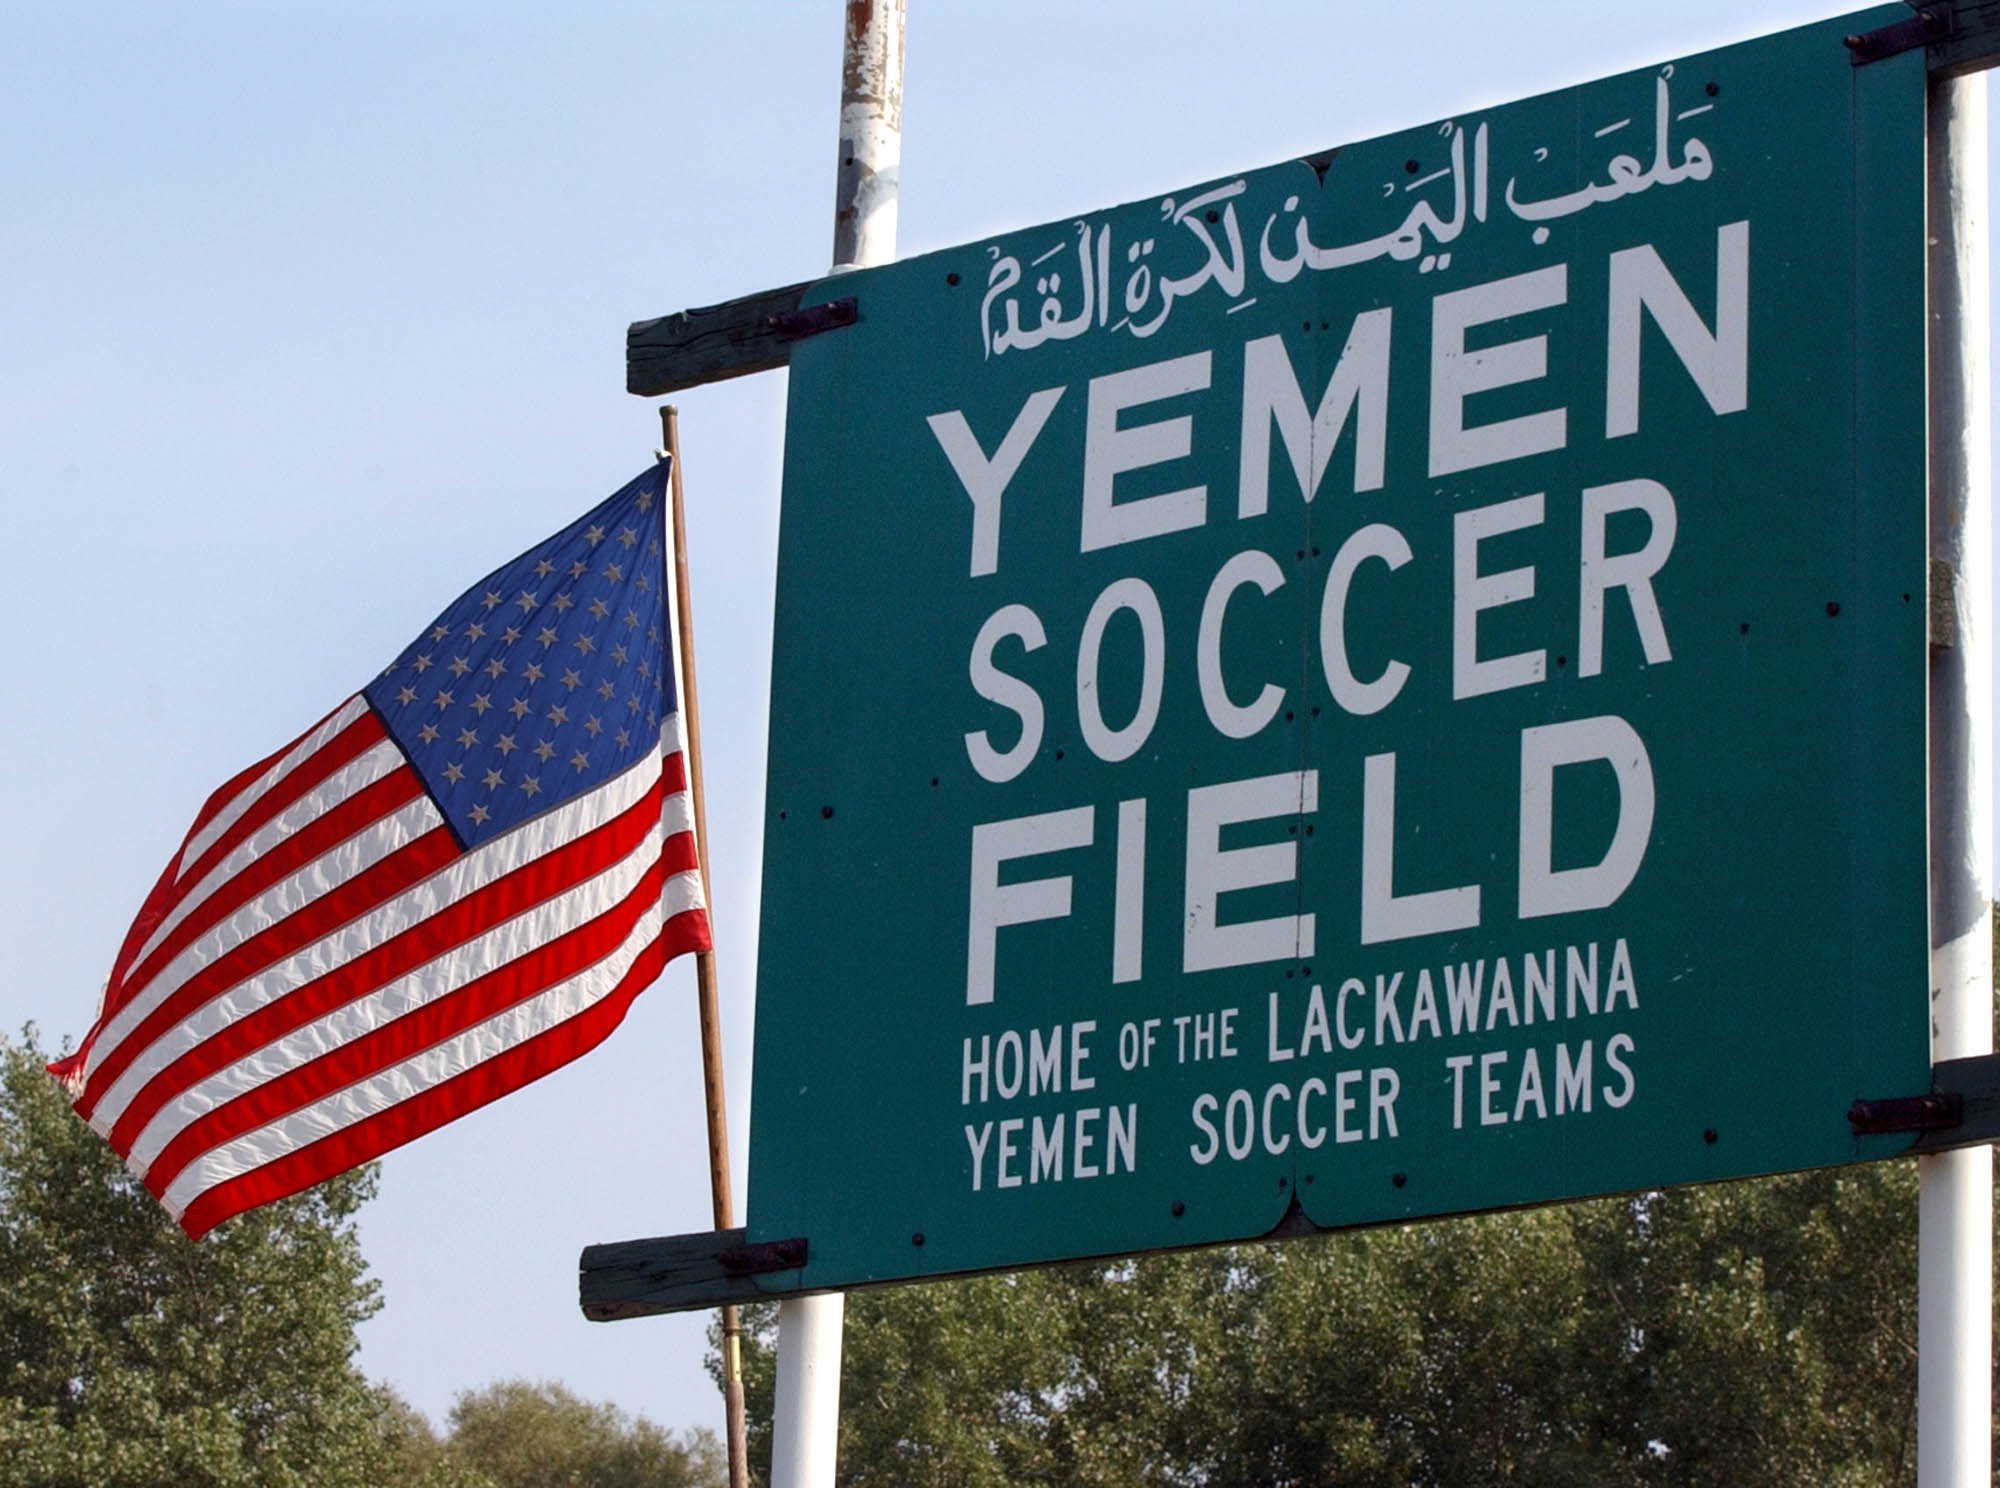 The sign for the Yemen Soccer Field was briefly taken down before being reinstated (J.P. Moczulski/AFP)